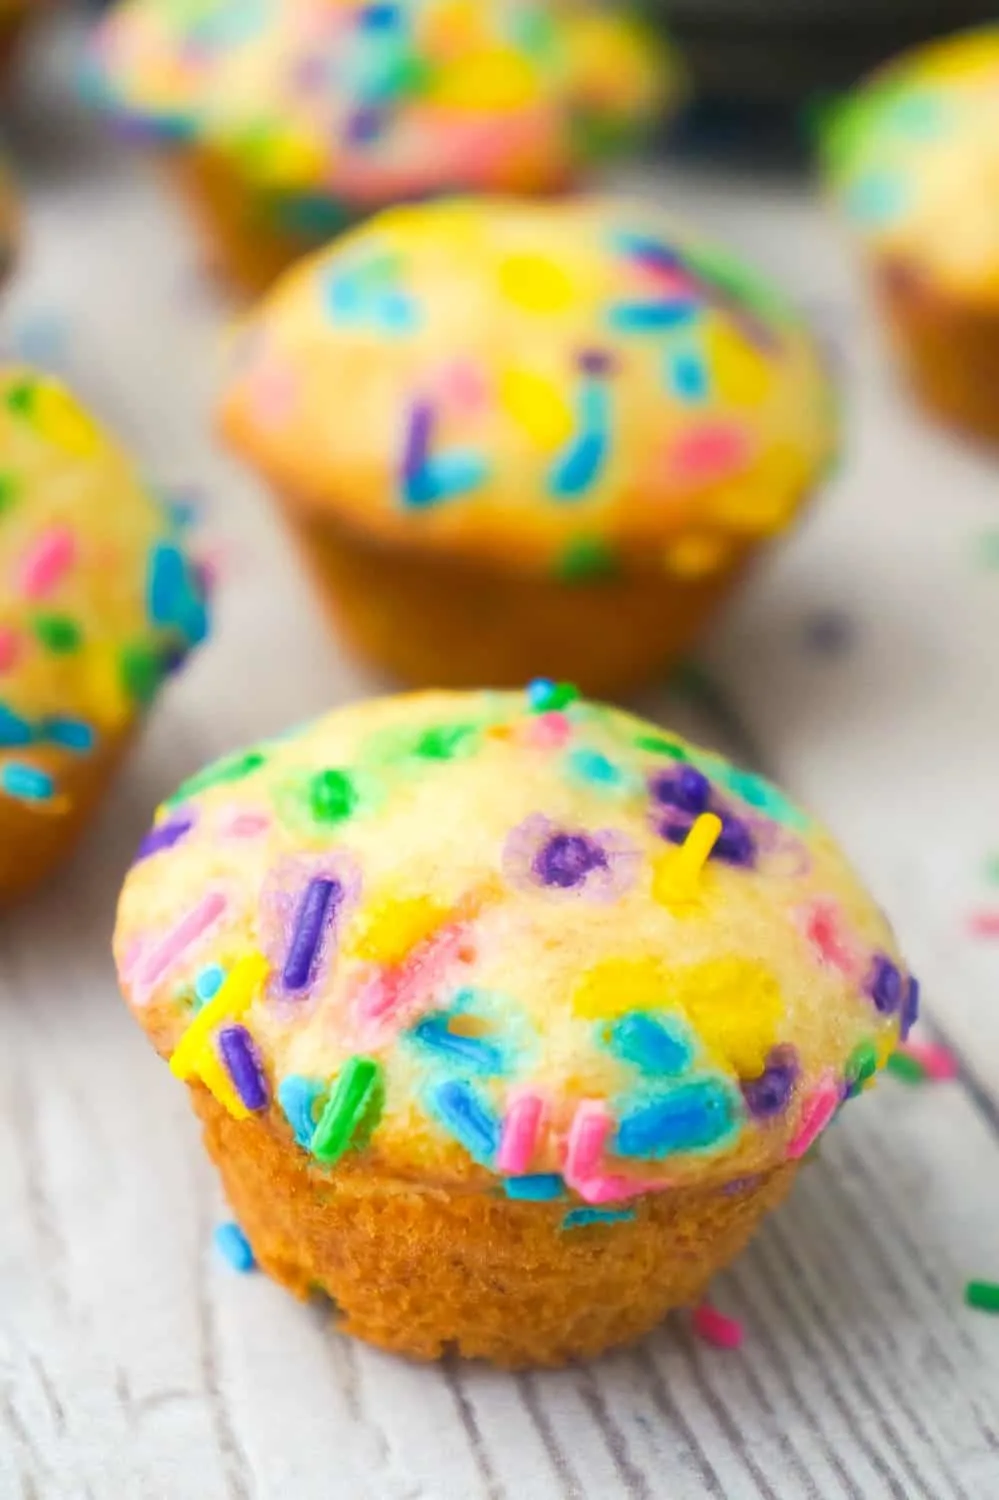 Mini Birthday Cake Banana Muffins are an easy snack or dessert your kids will love. These colourful mini muffins are made with confetti cake mix, ripe bananas and lots of sprinkles.